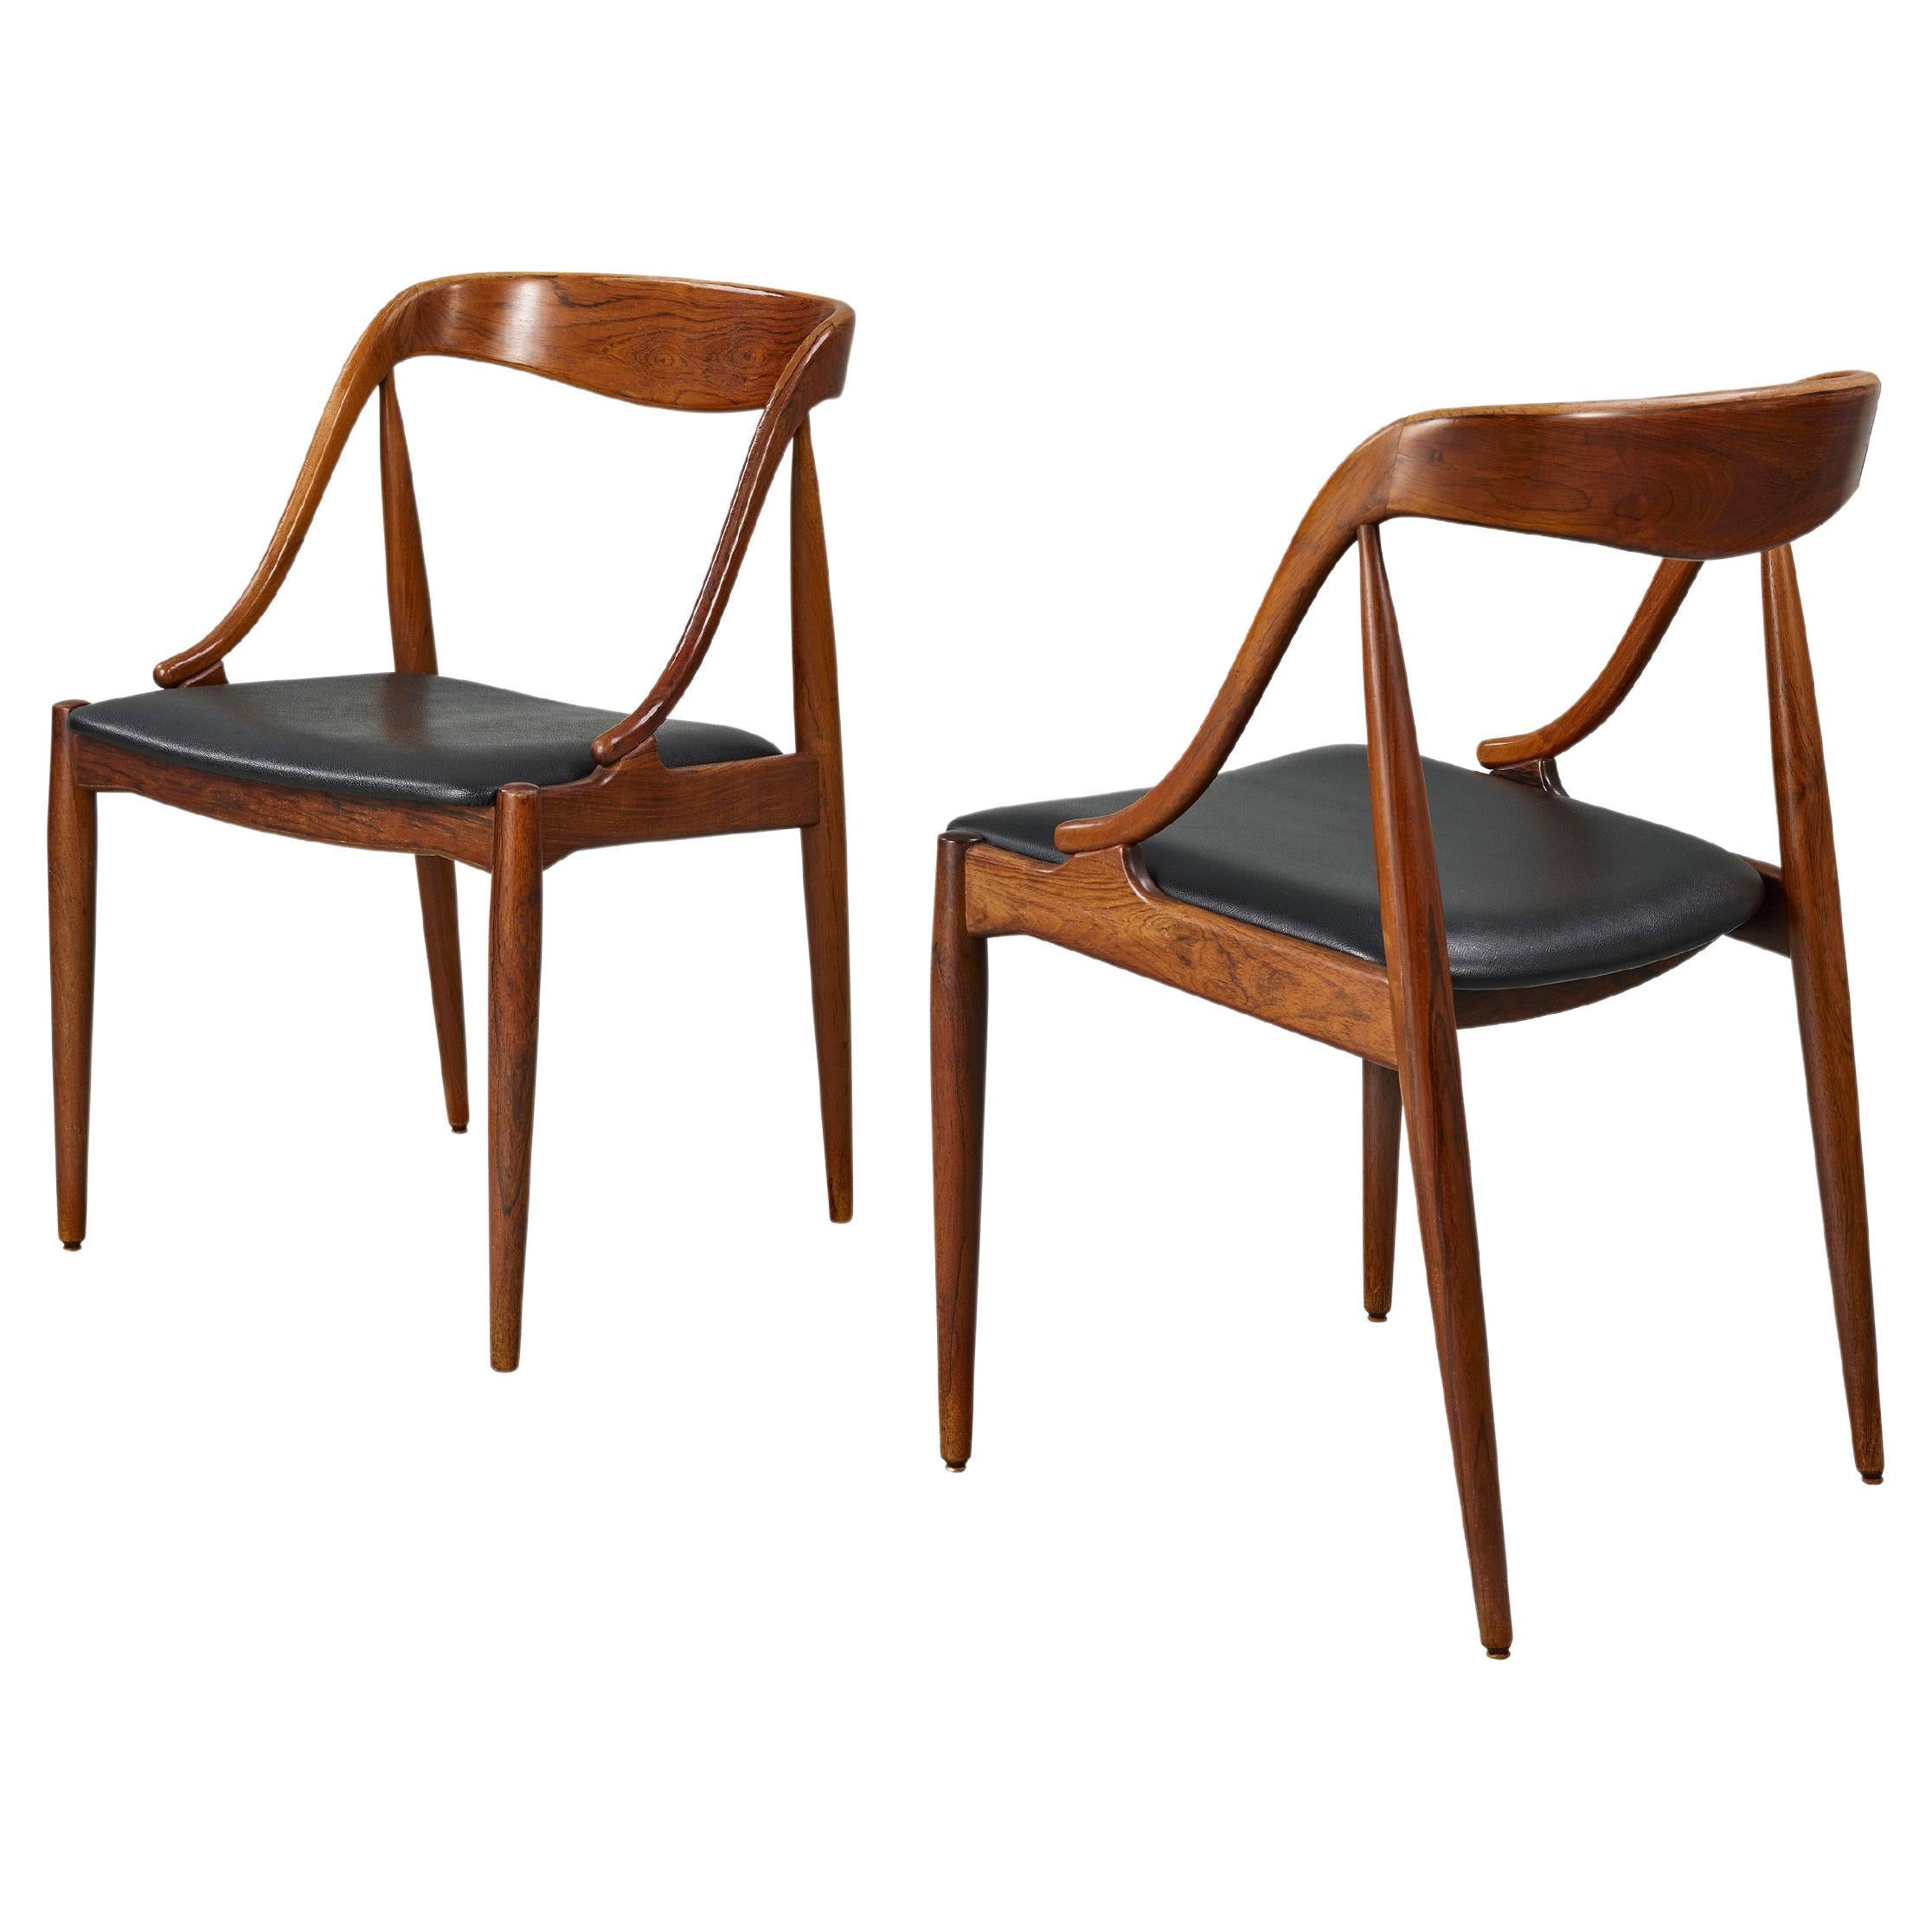 Offering a pair of Johannes Andersen-designed curved dining chairs for Uldum Møbelfabrik Denmark, these Scandinavian Modern classics are carved from solid teak wood. Symbolizing Danish Mid-Century Modern Design, they boast exquisite curves and